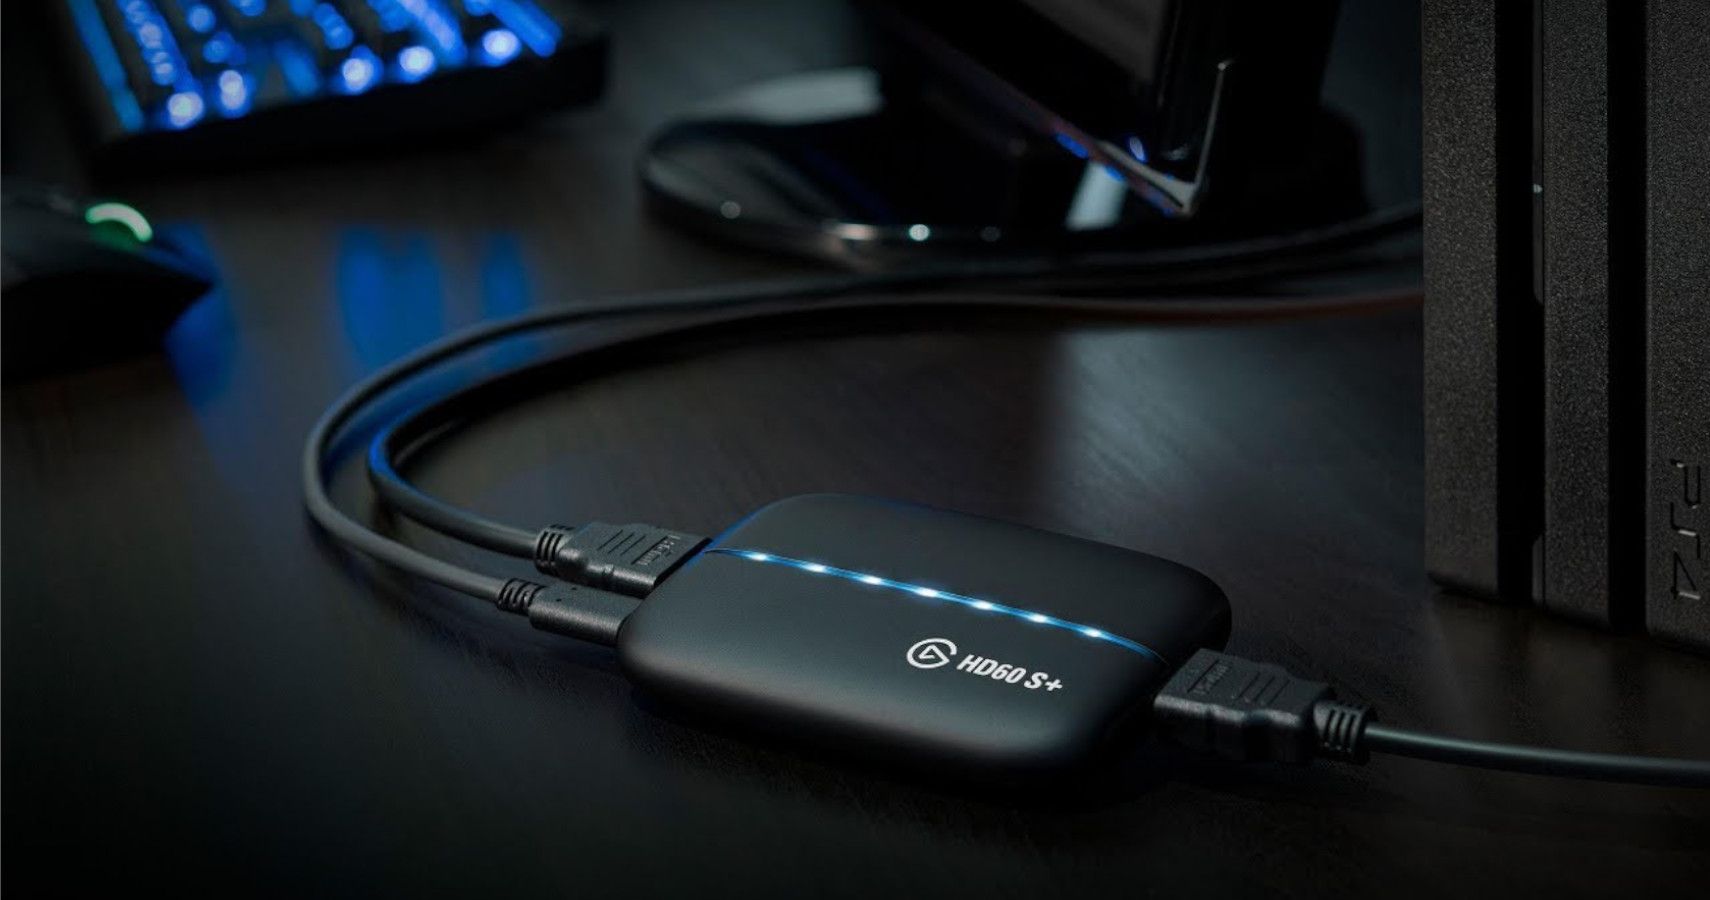 Elgato HD60 S+ Review: Capturing The Best Video Game Content